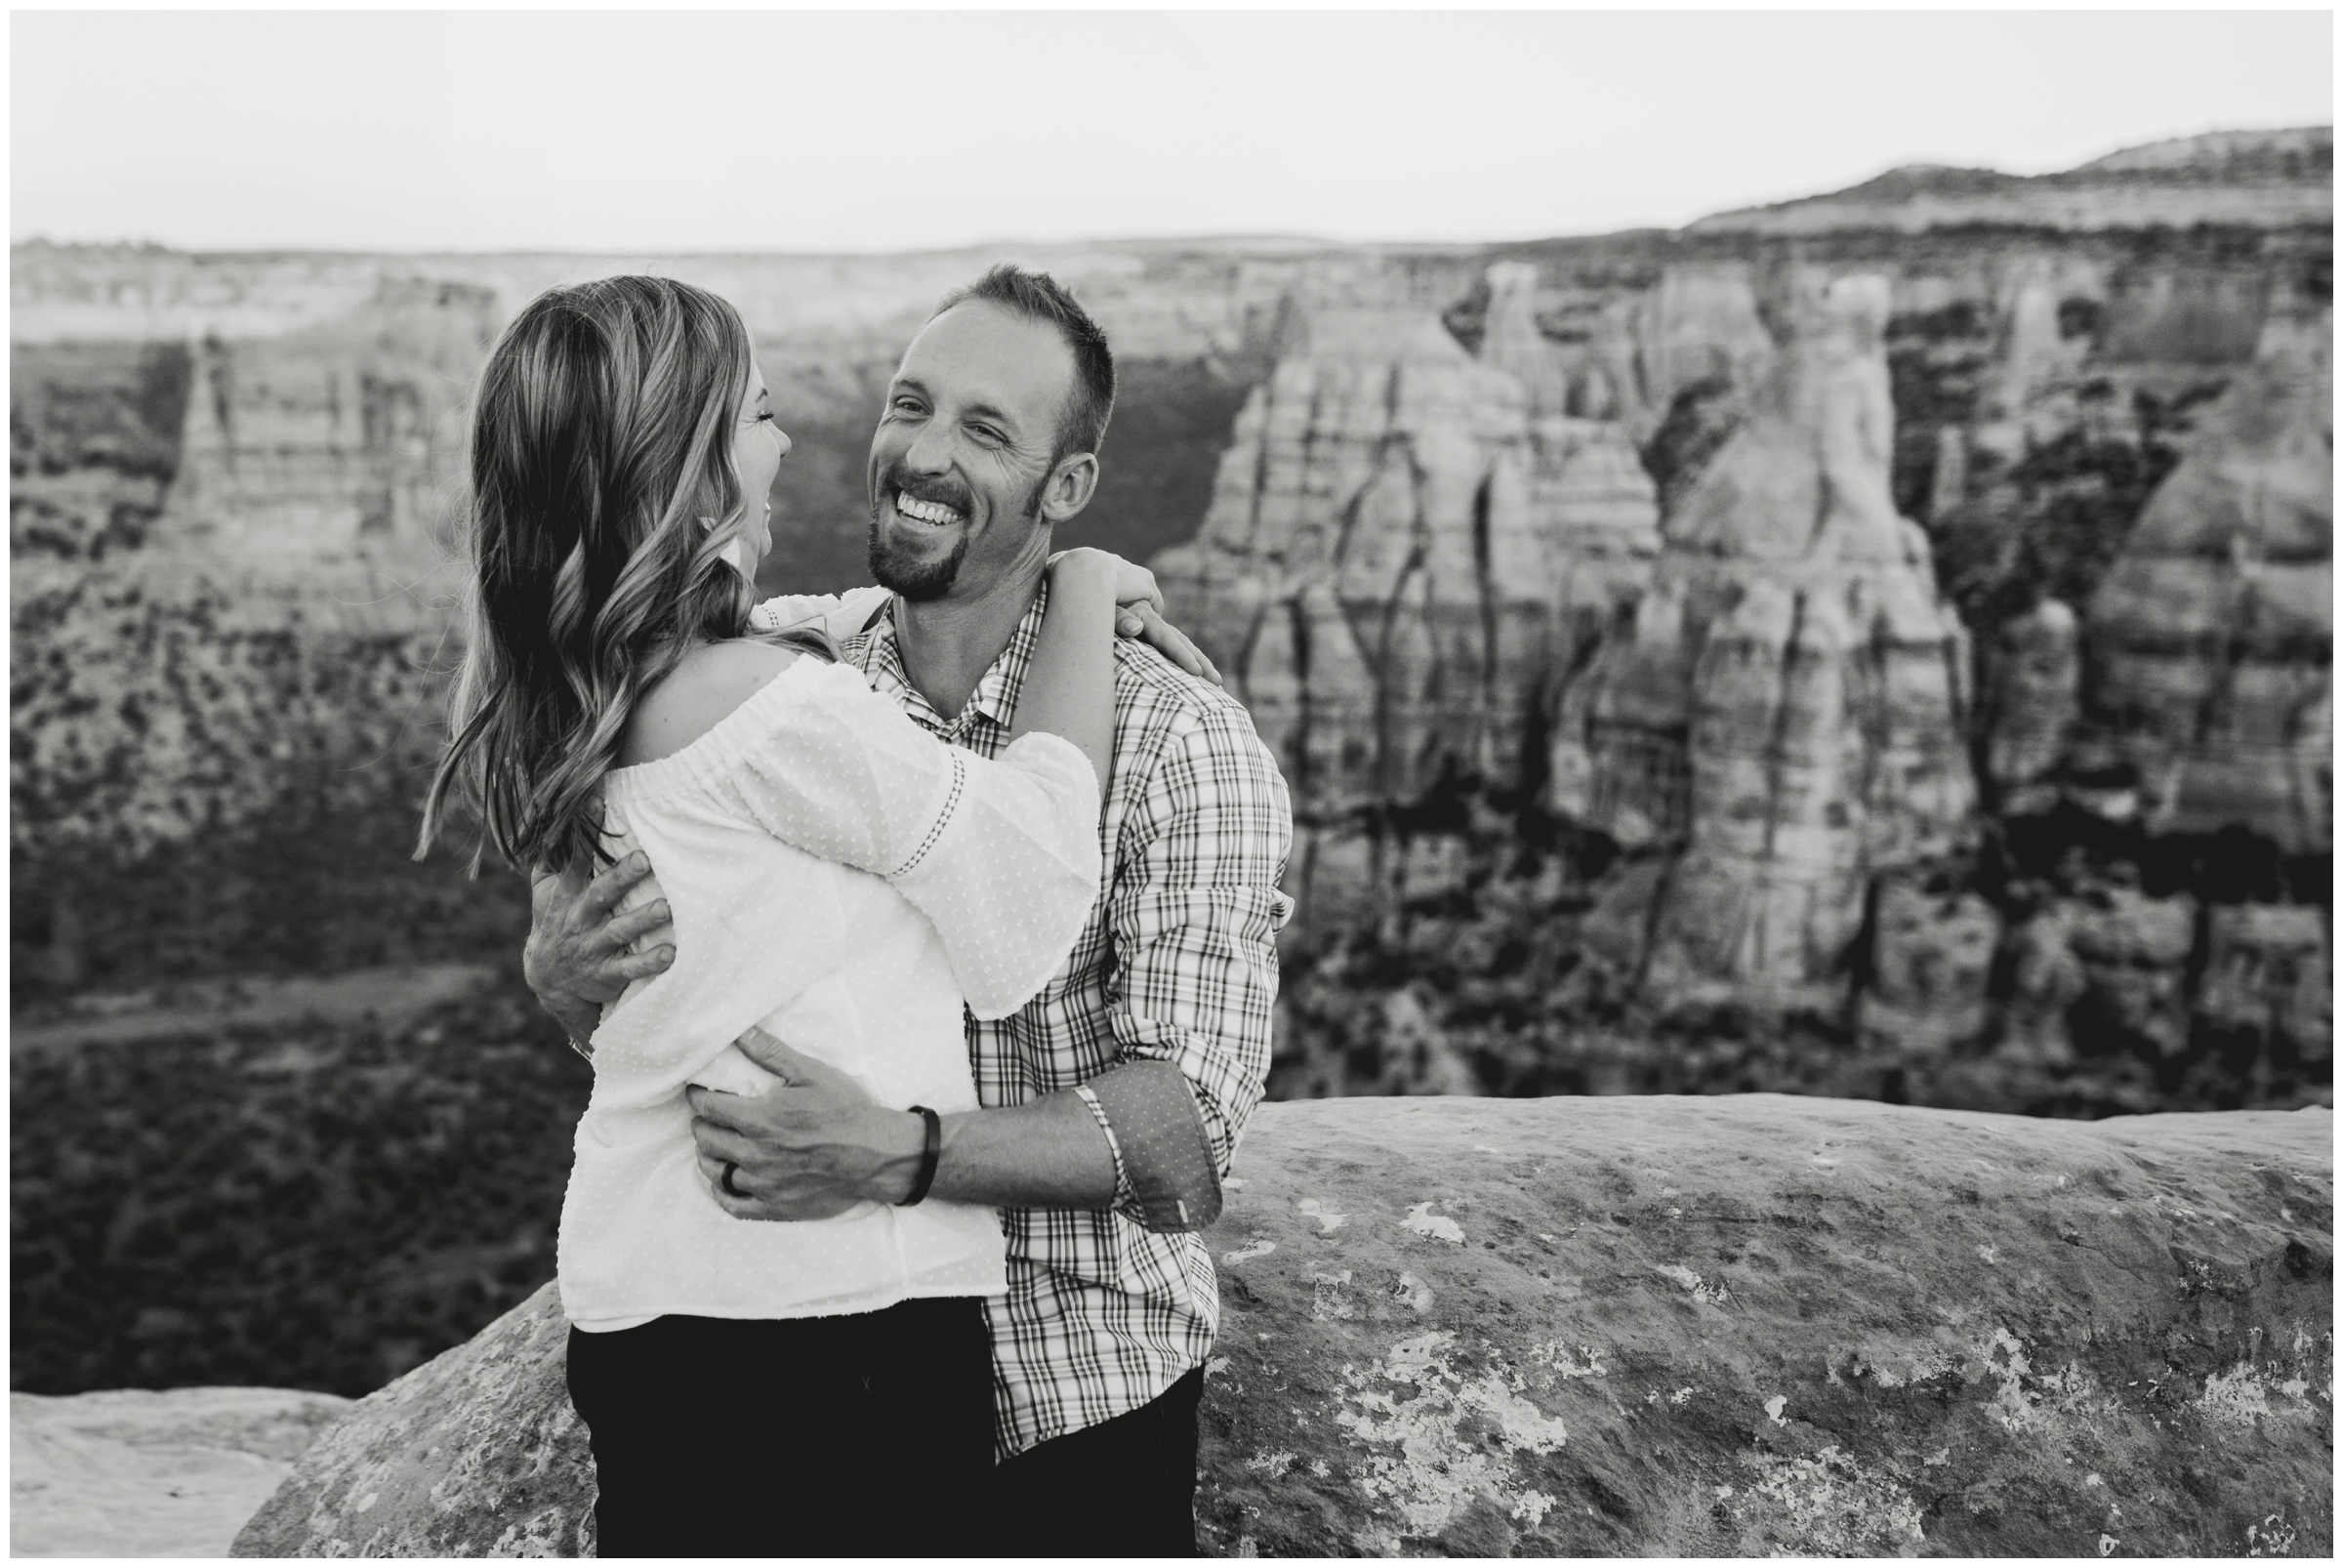 Couple's anniversary photos at Colorado National Monument, by Grand Junction photographer Plum Pretty Photography.